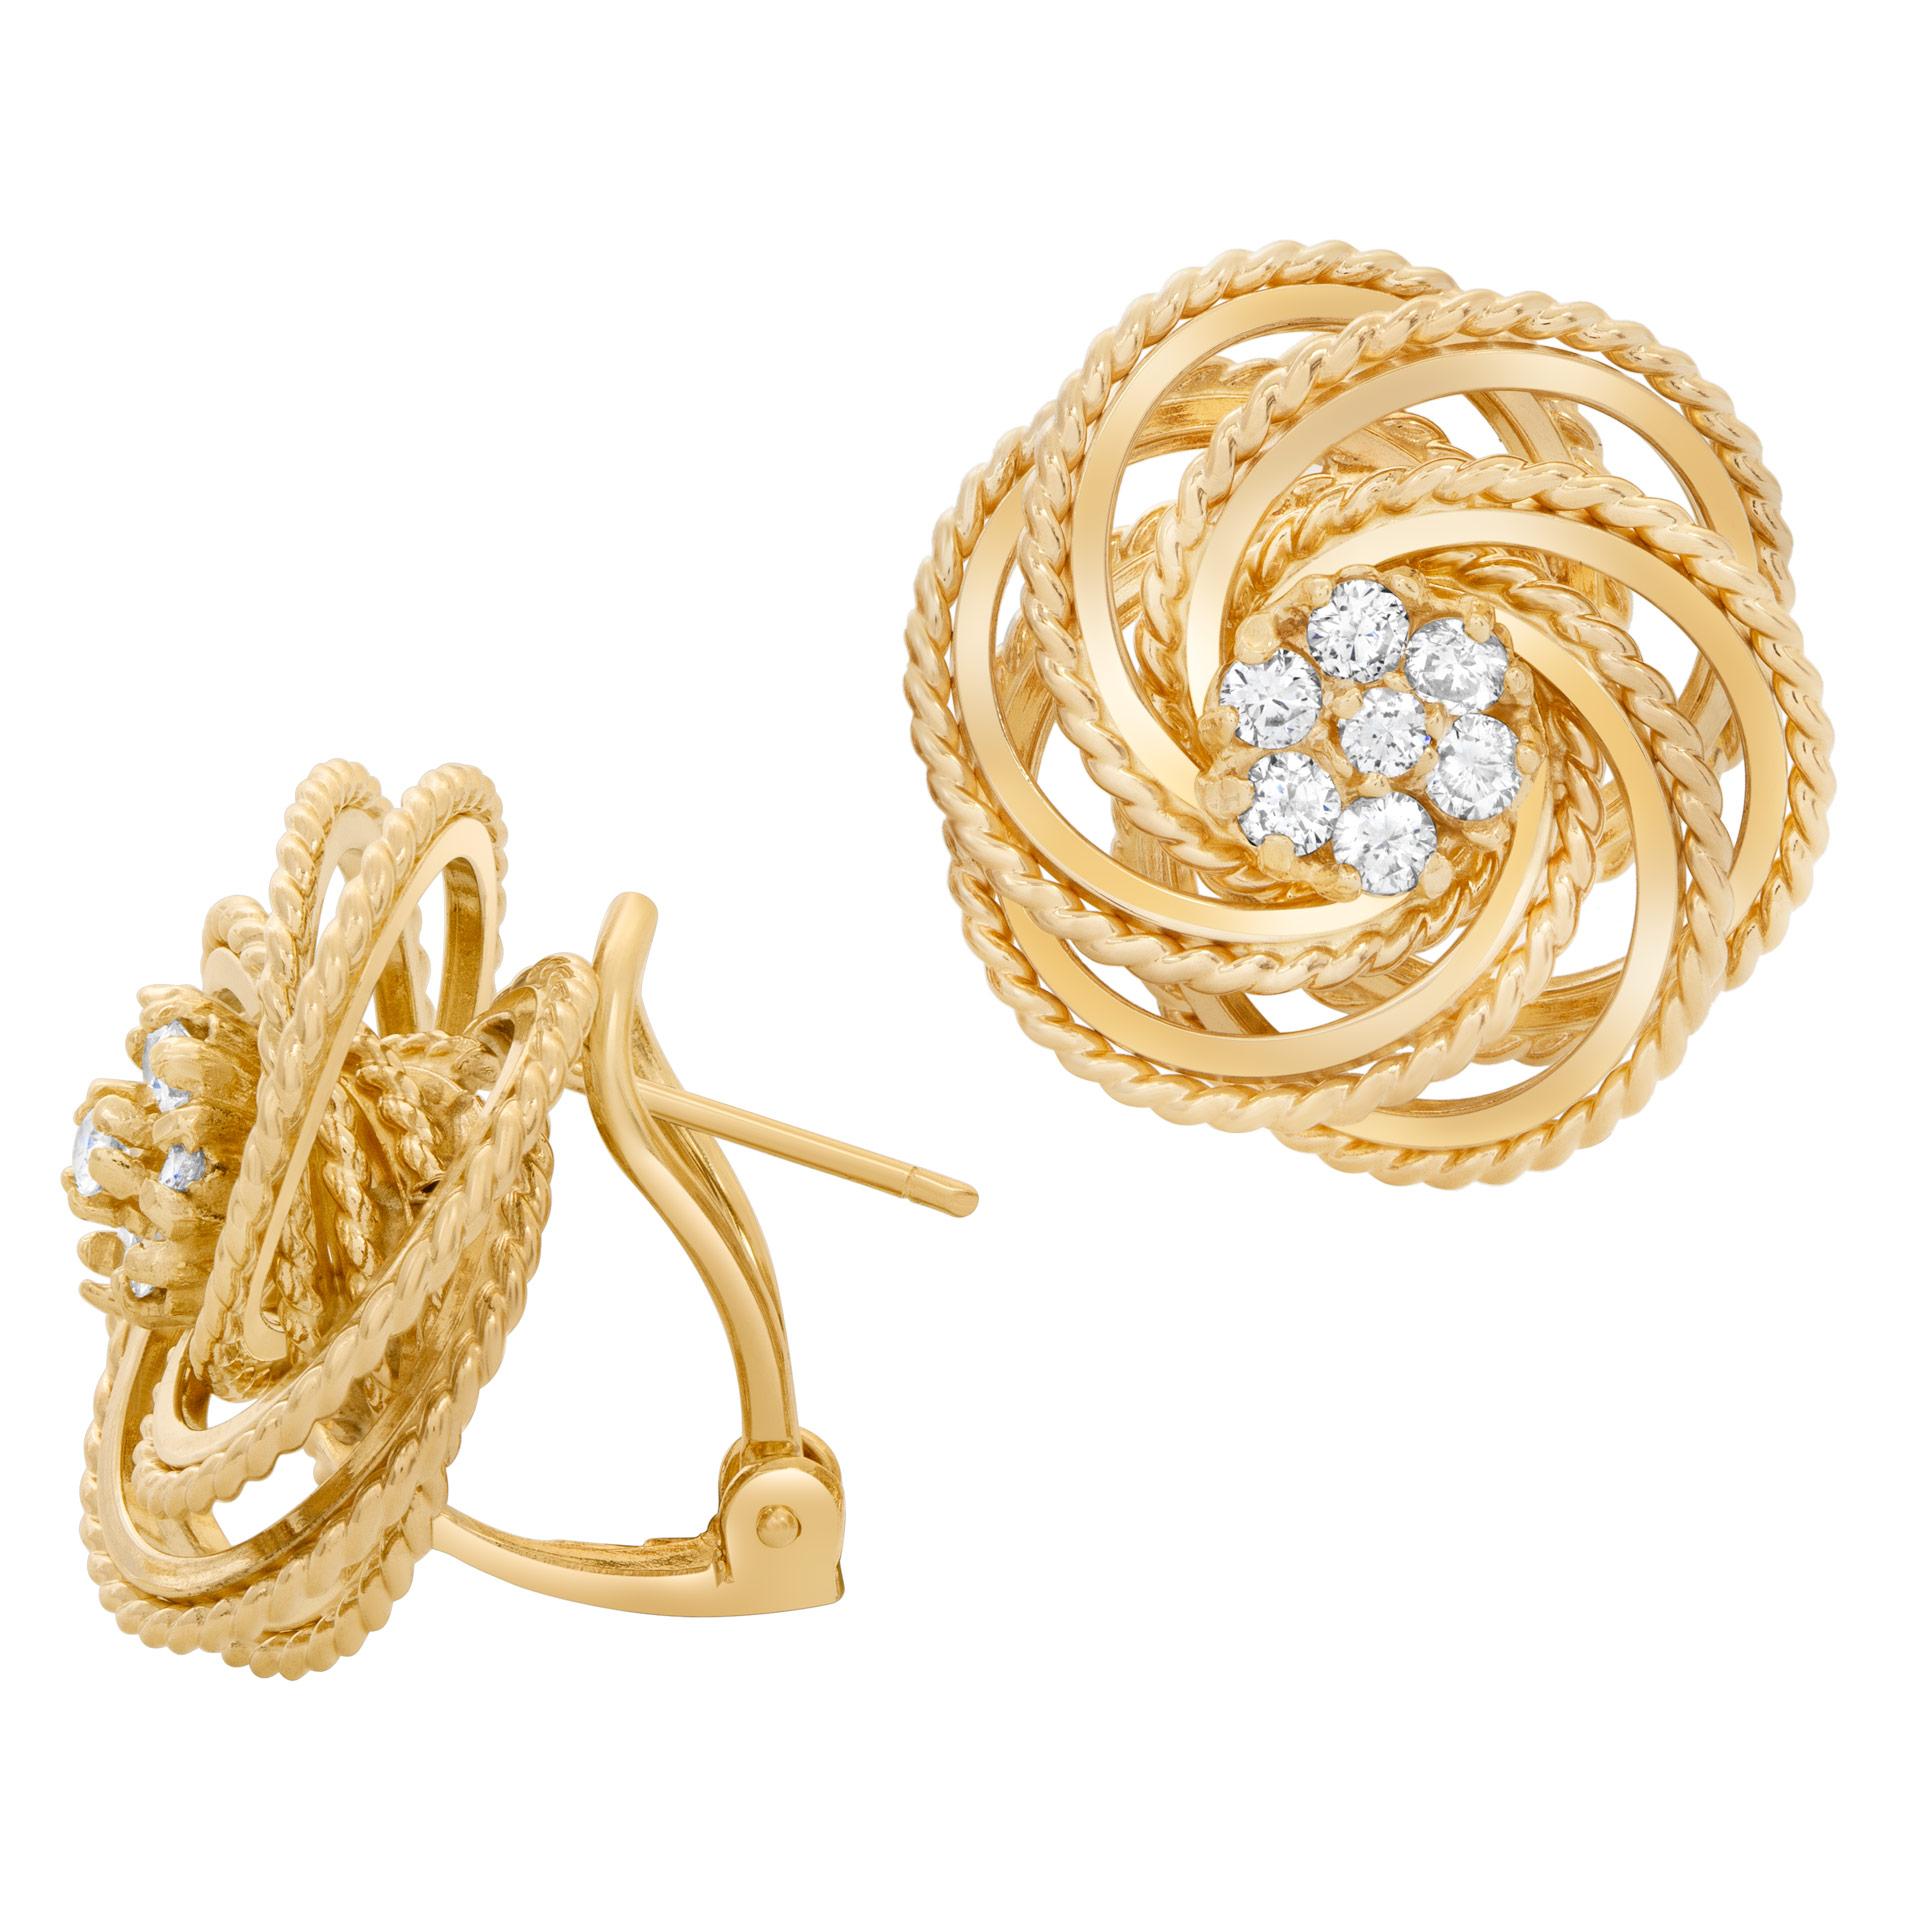 Modern Diamond Knotted Earrings in 14k Yellow Gold